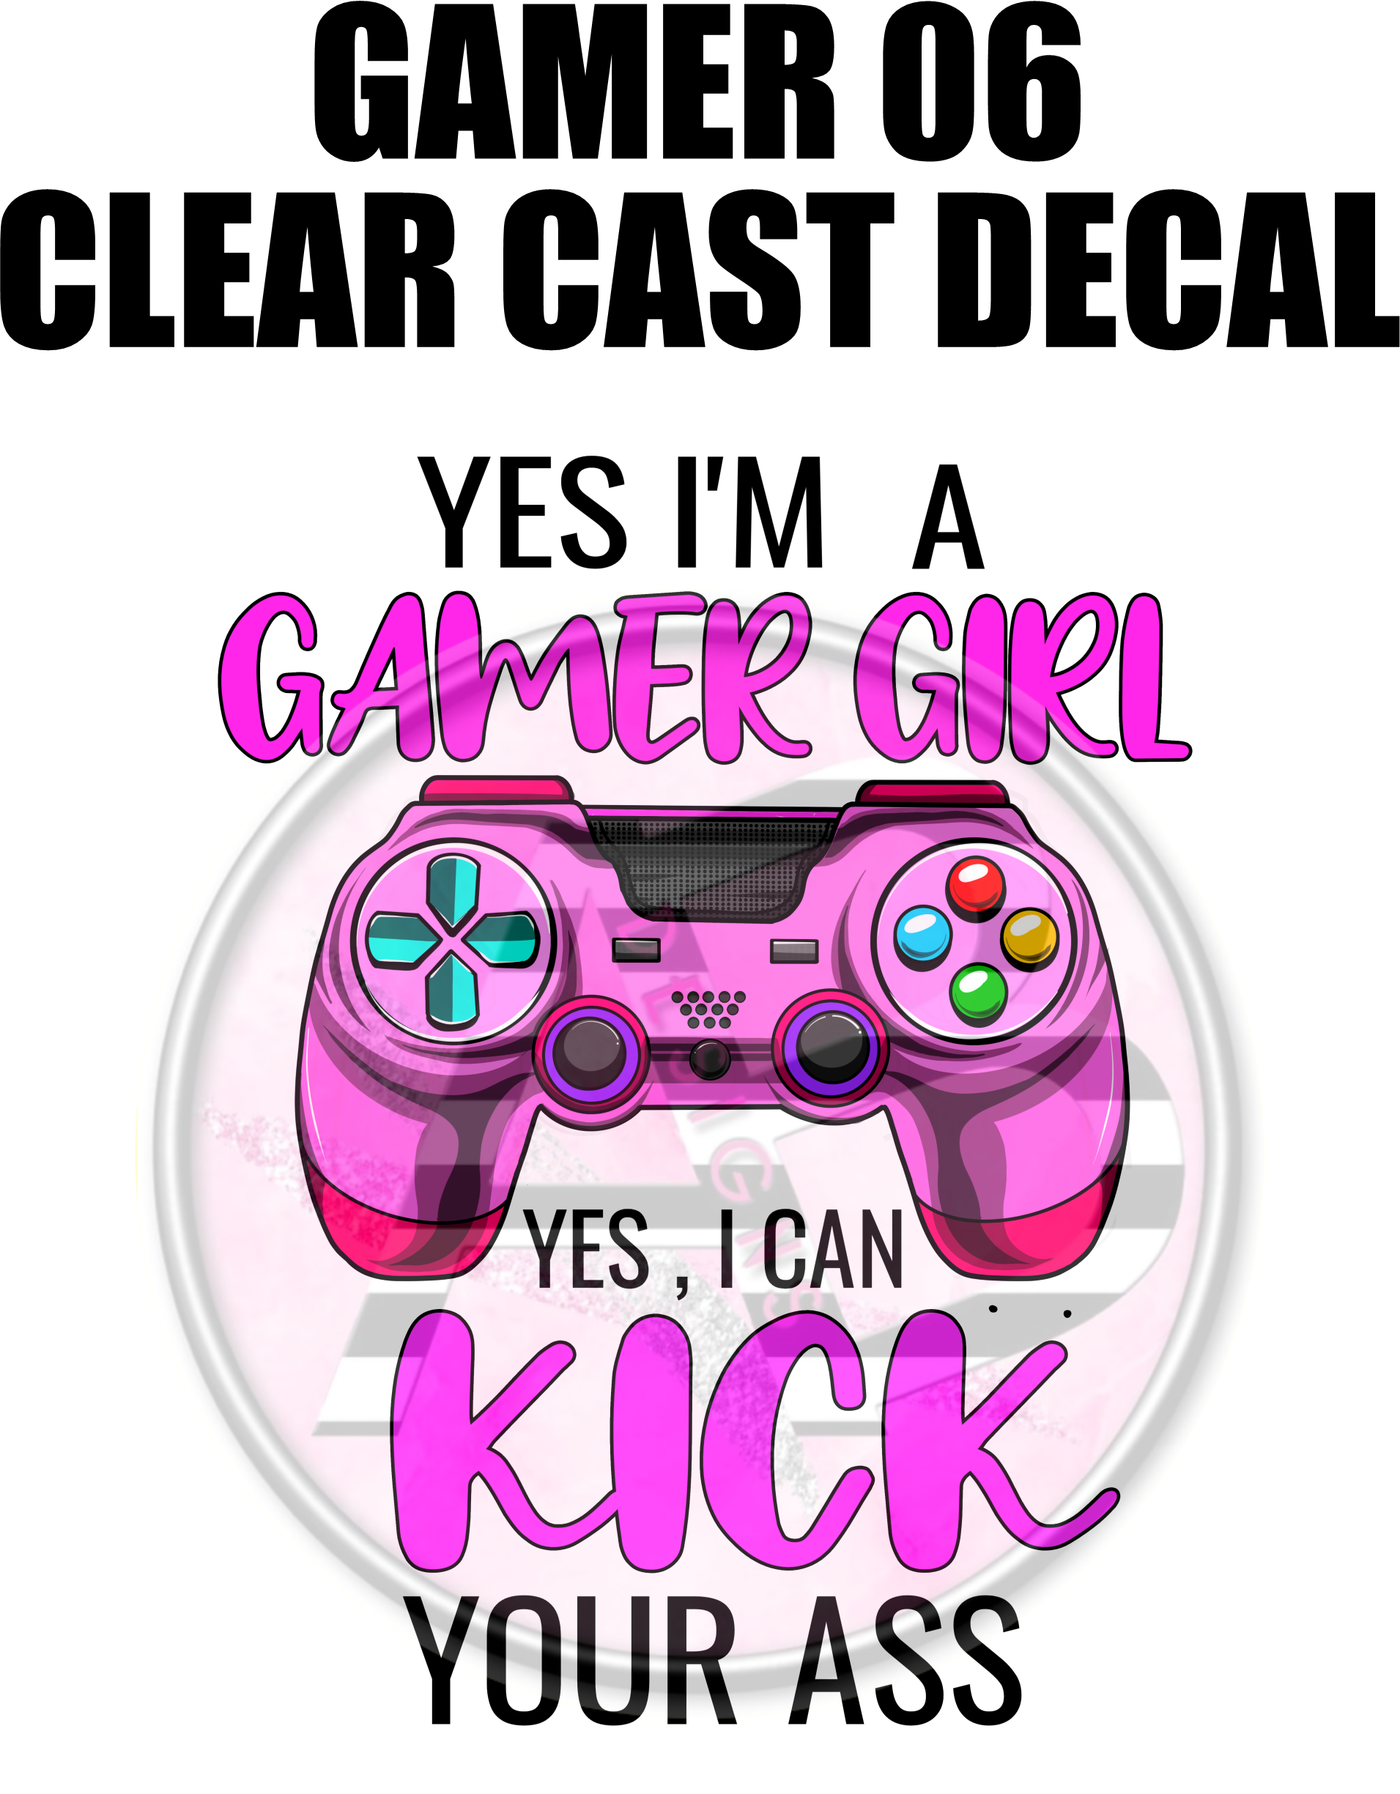 Gamer 06 - Clear Cast Decal